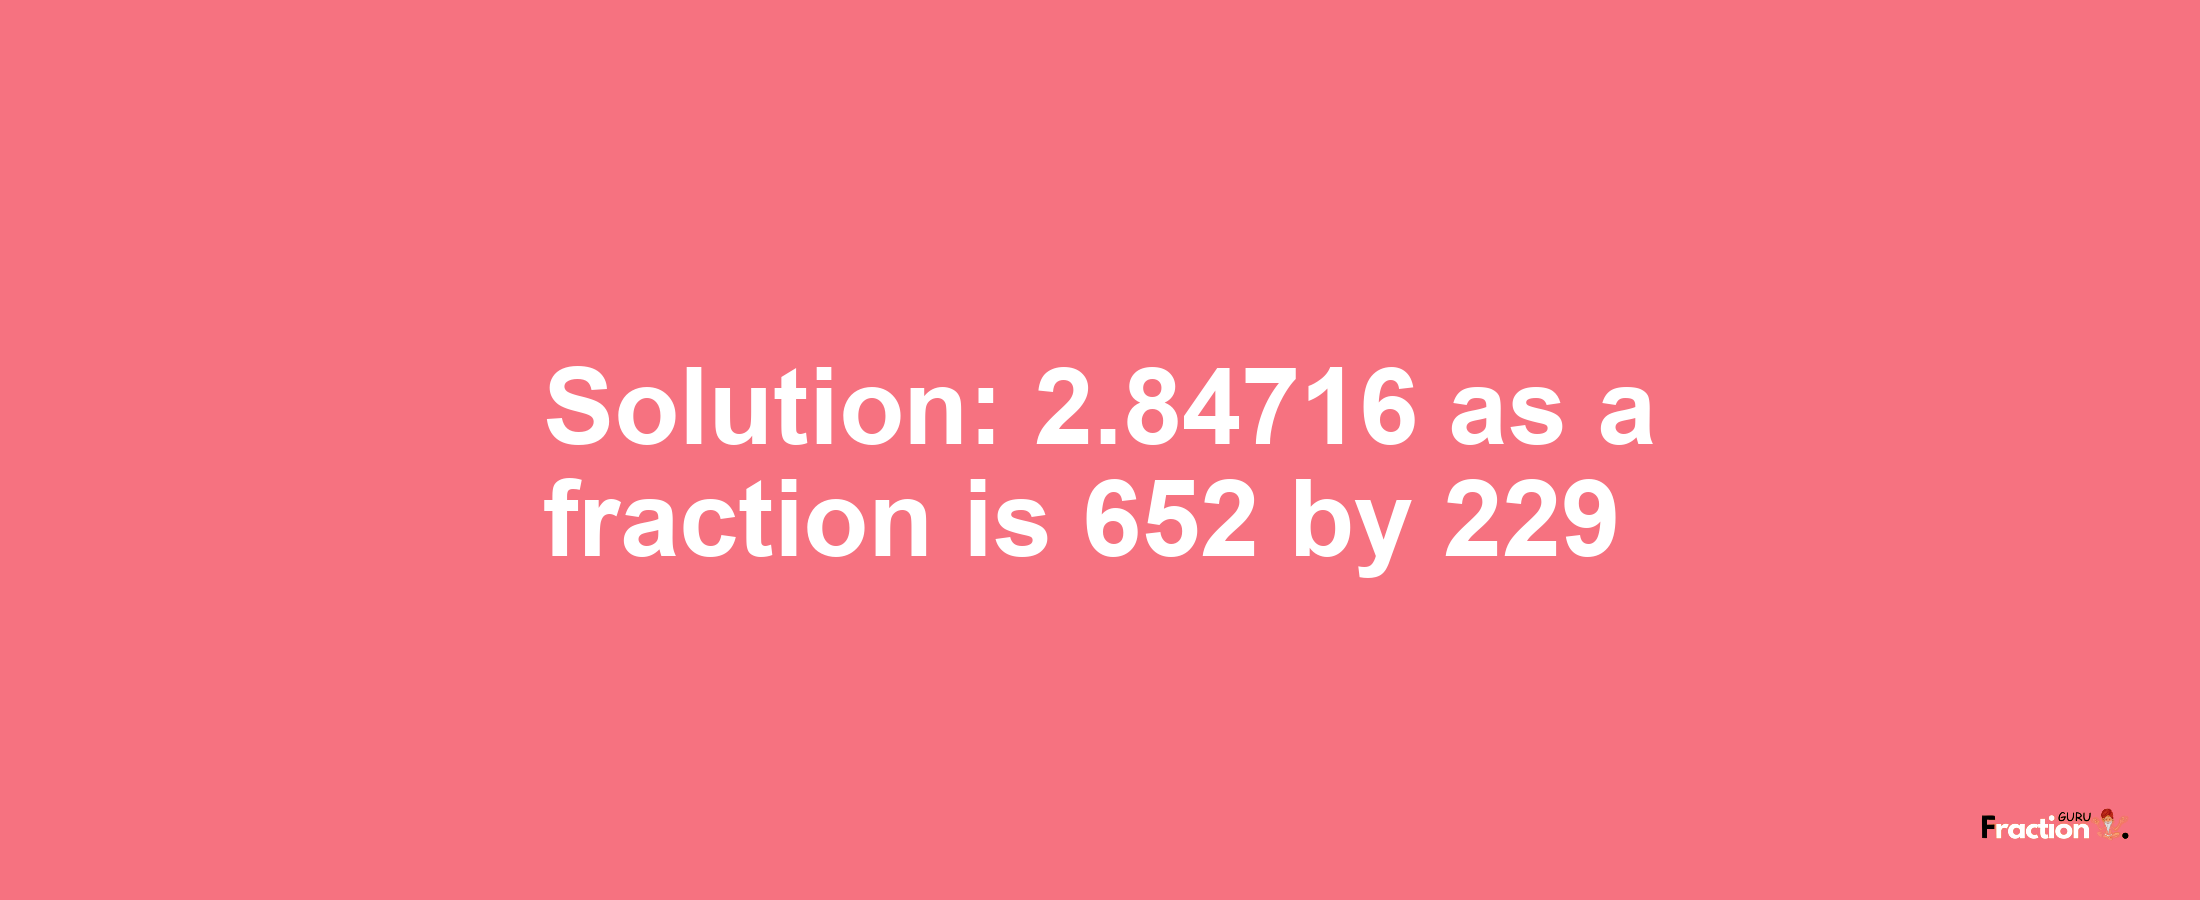 Solution:2.84716 as a fraction is 652/229